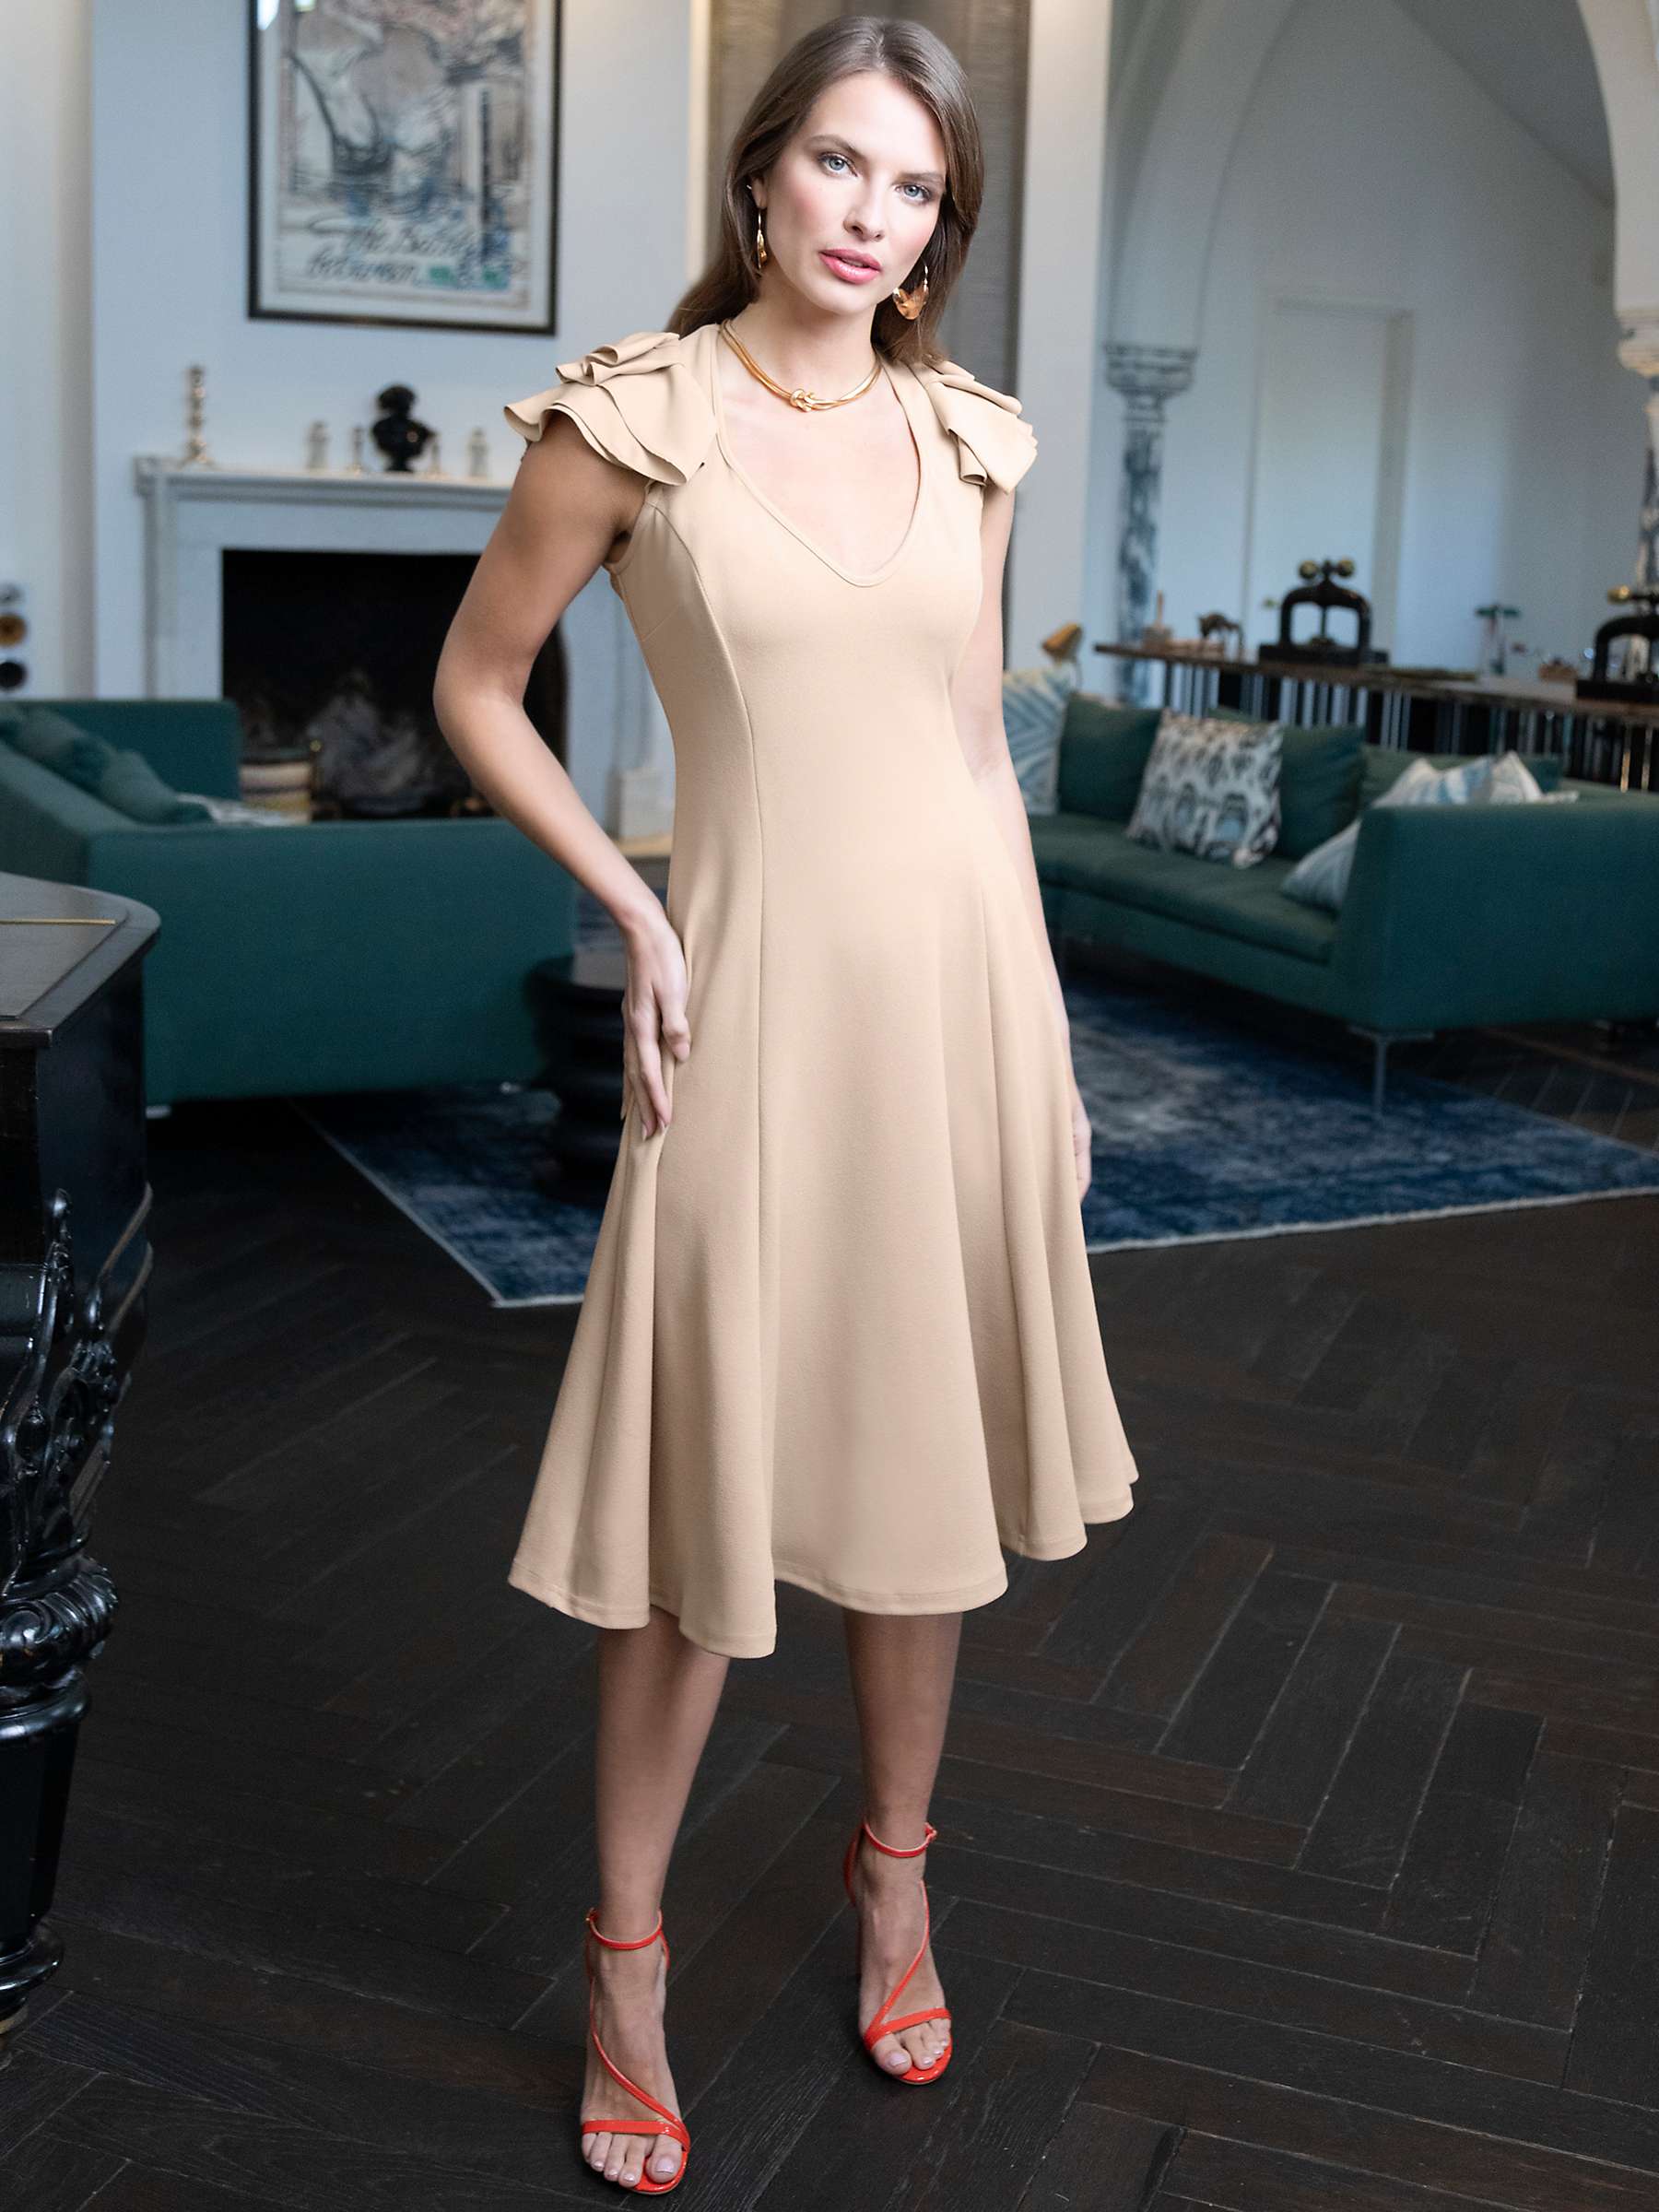 Buy HotSquash Frill Sleeve A-Line Dress Online at johnlewis.com